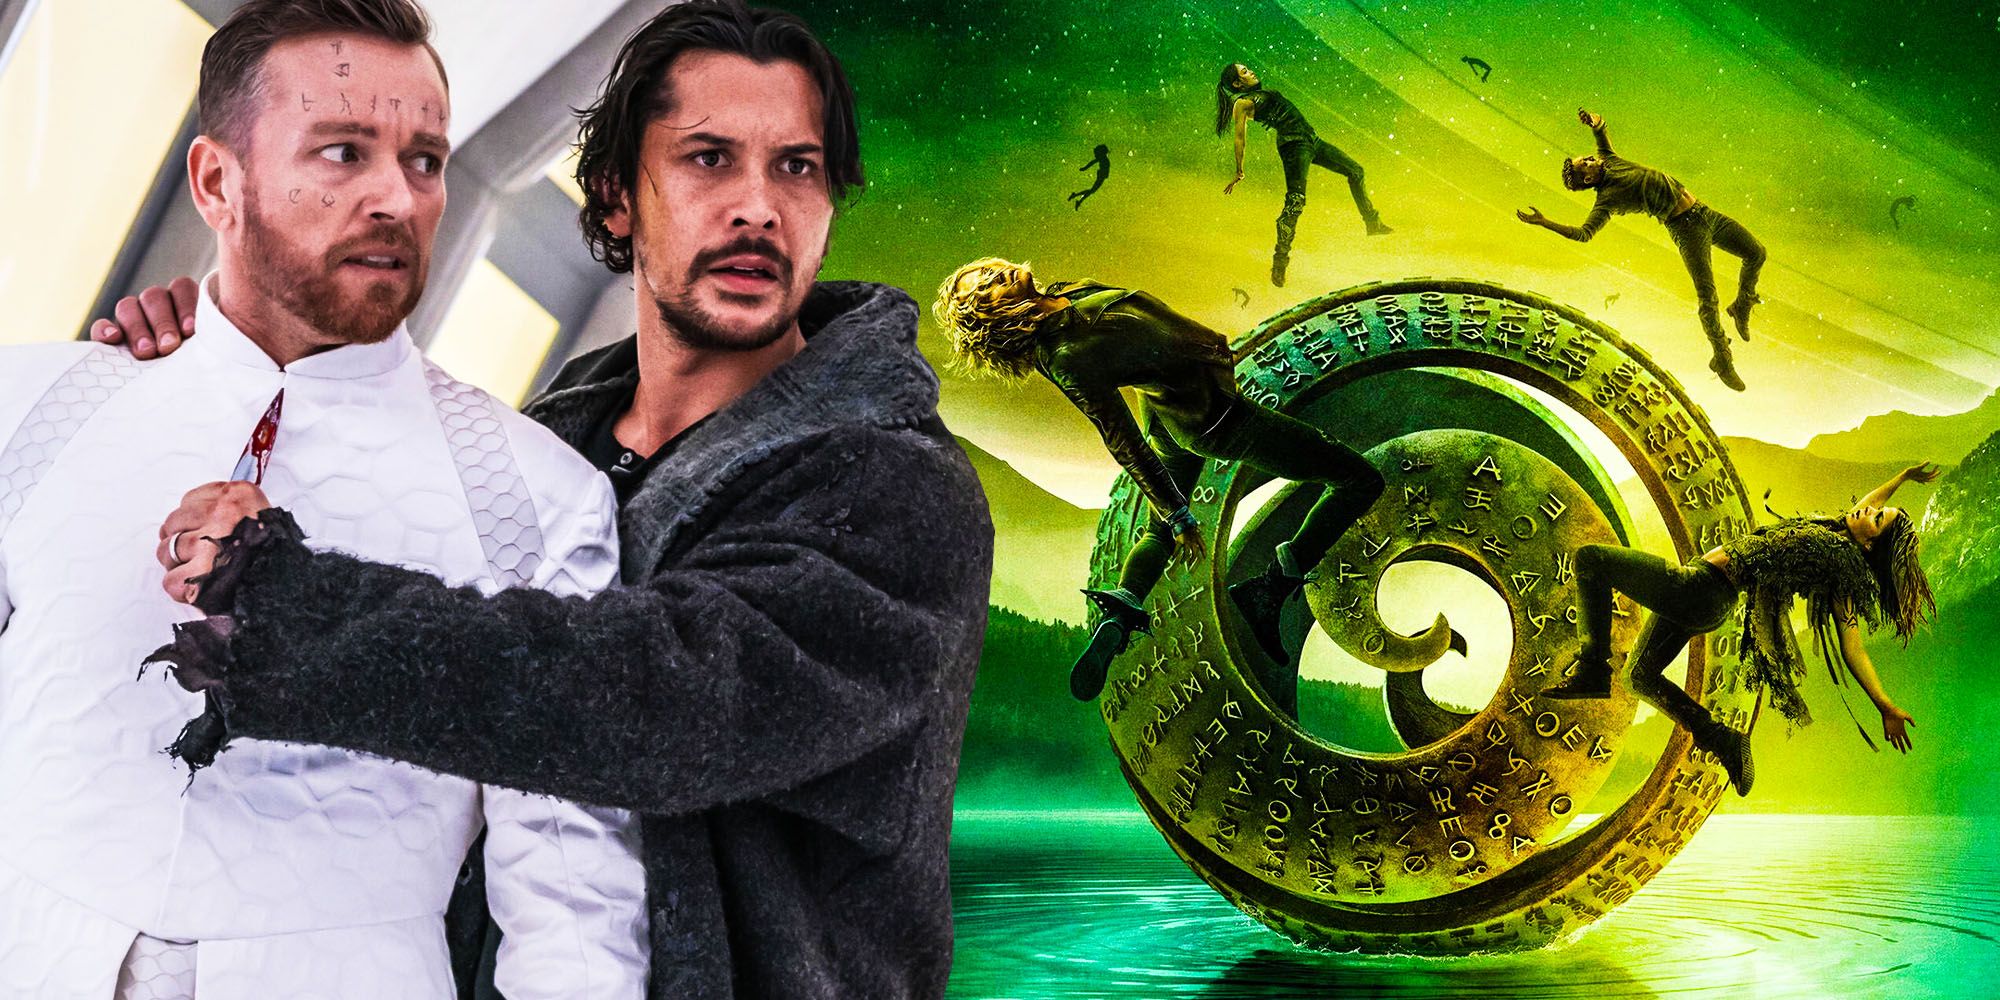 A blended image features Bellamy holding a knife on one of Cadogan's Disciples in The 100 season 7 and The 100 season 7 promo art that included cast members floating by the spiral artifact